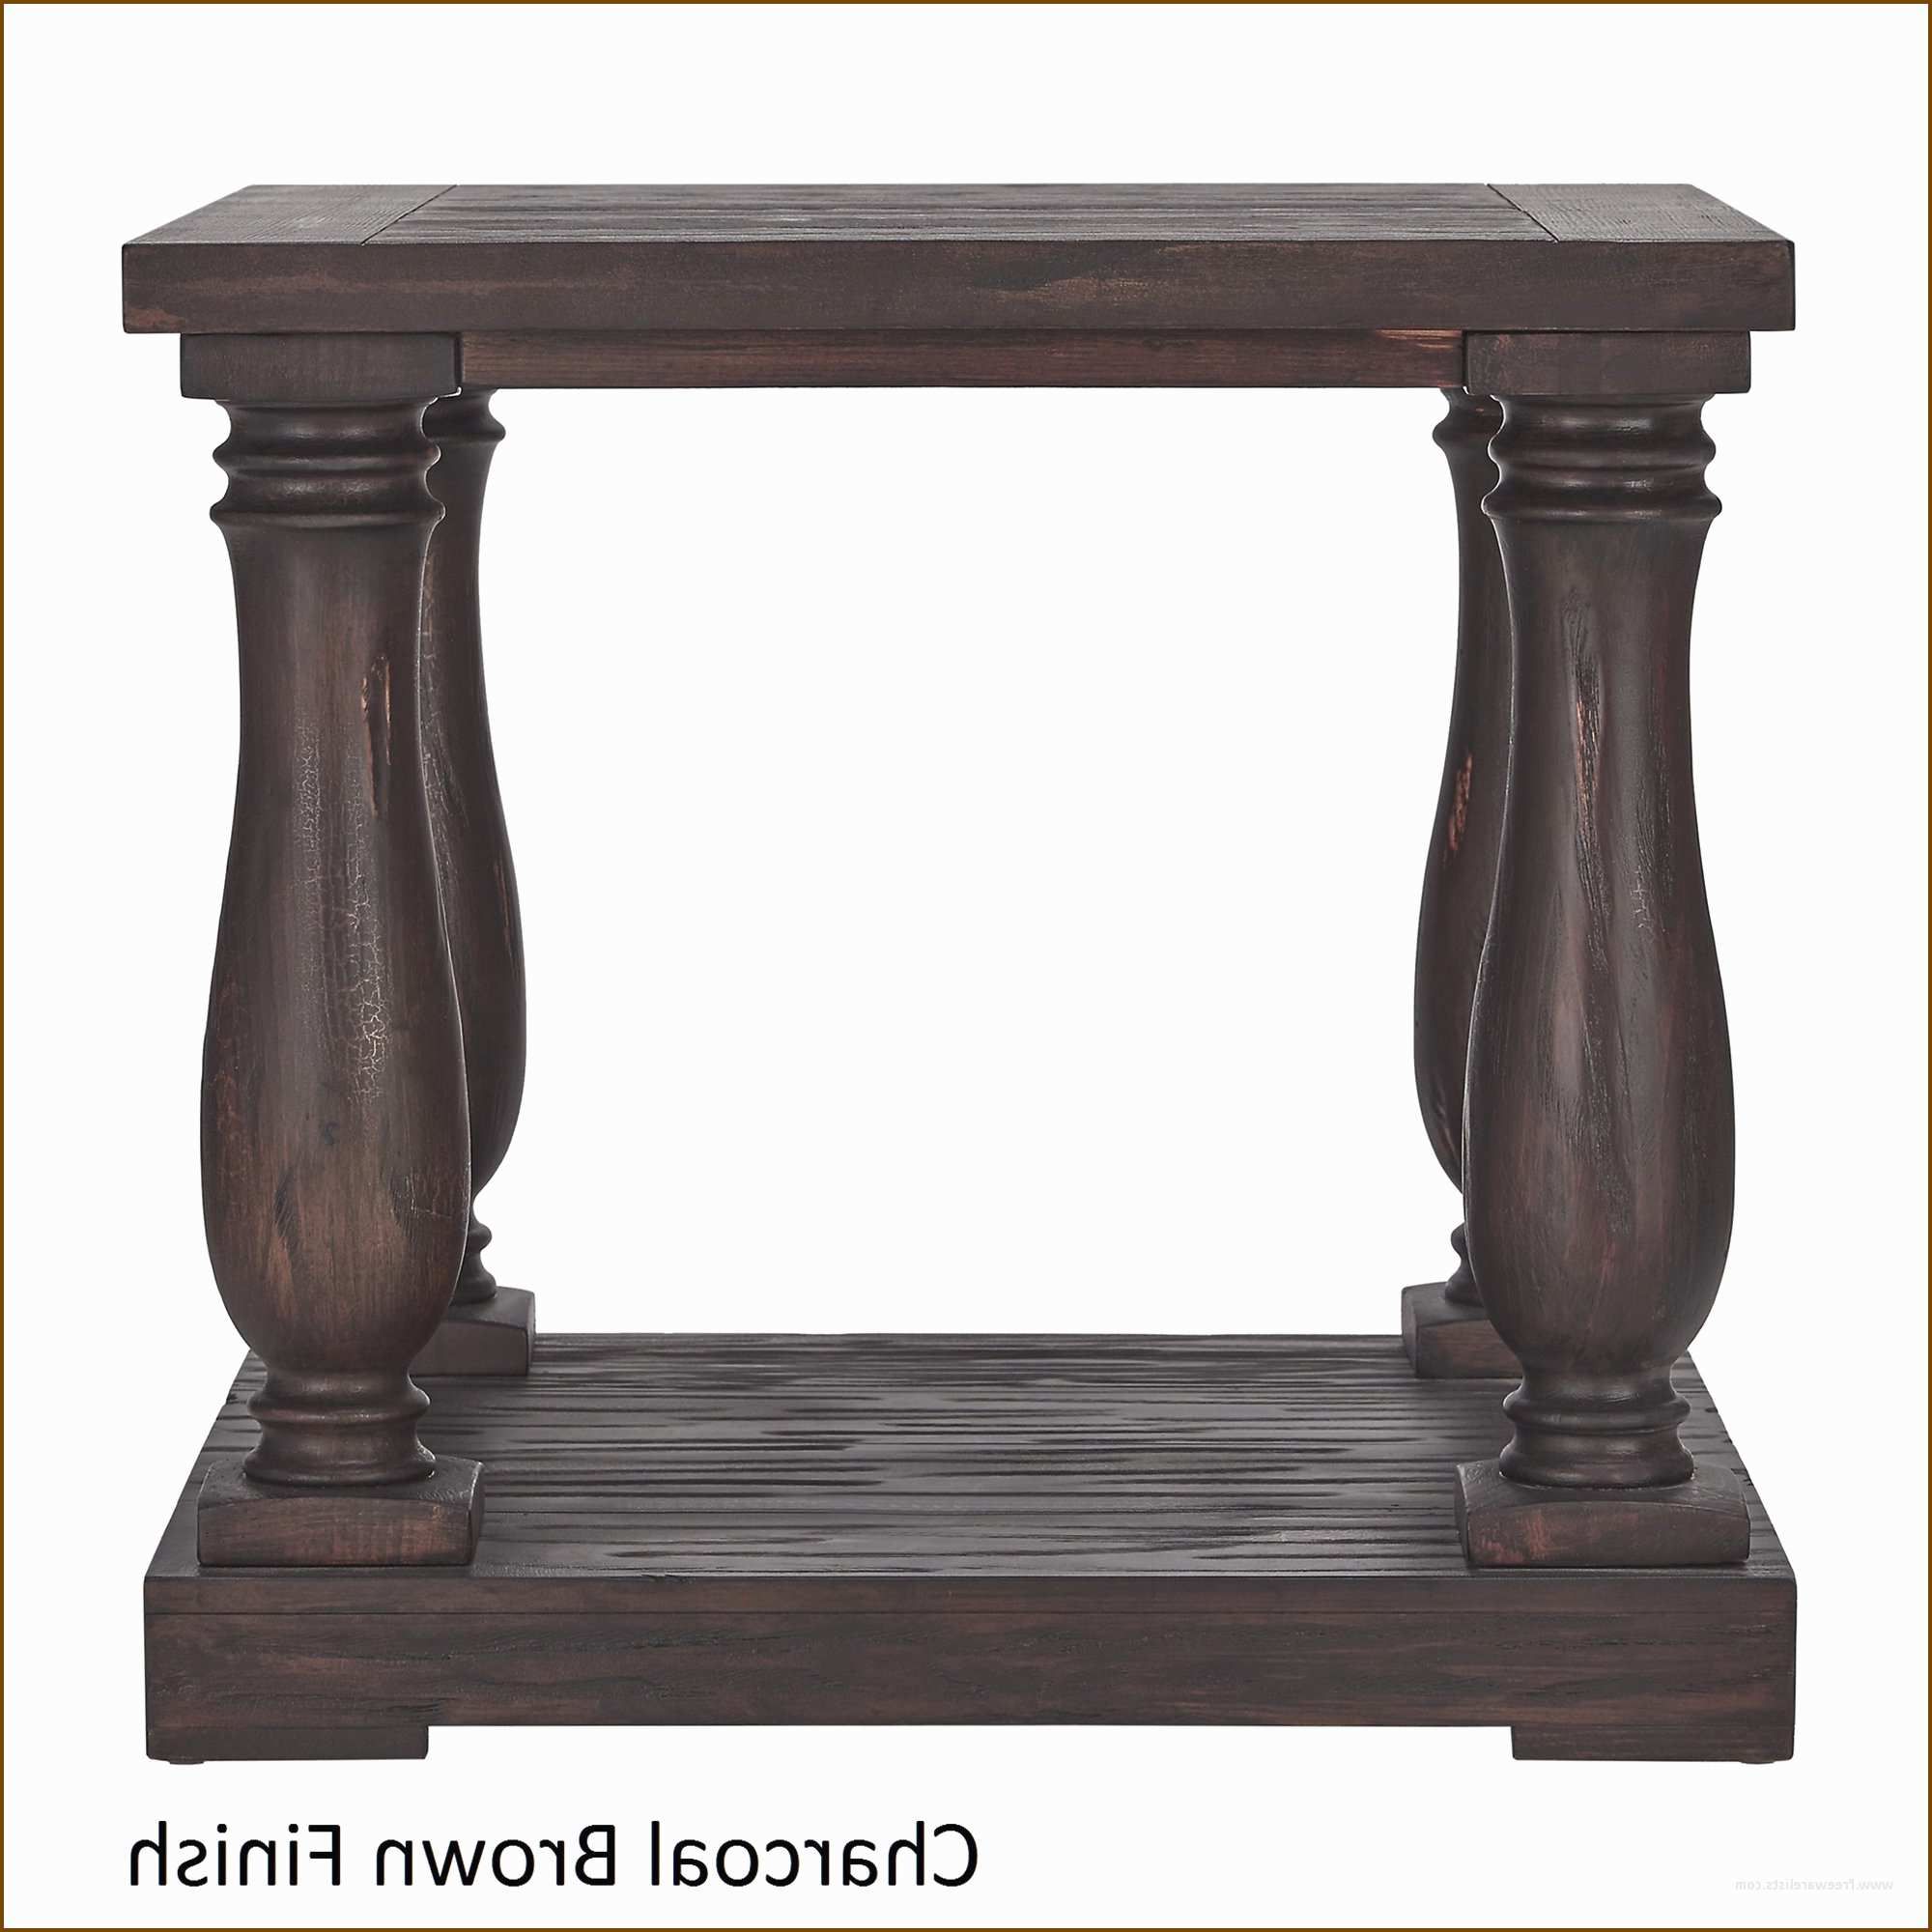 Signal Hills Edmaire Rustic Baluster 55 Inch Coffee Table For 2020 Edmaire Rustic Pine Baluster Coffee Tables (View 14 of 20)